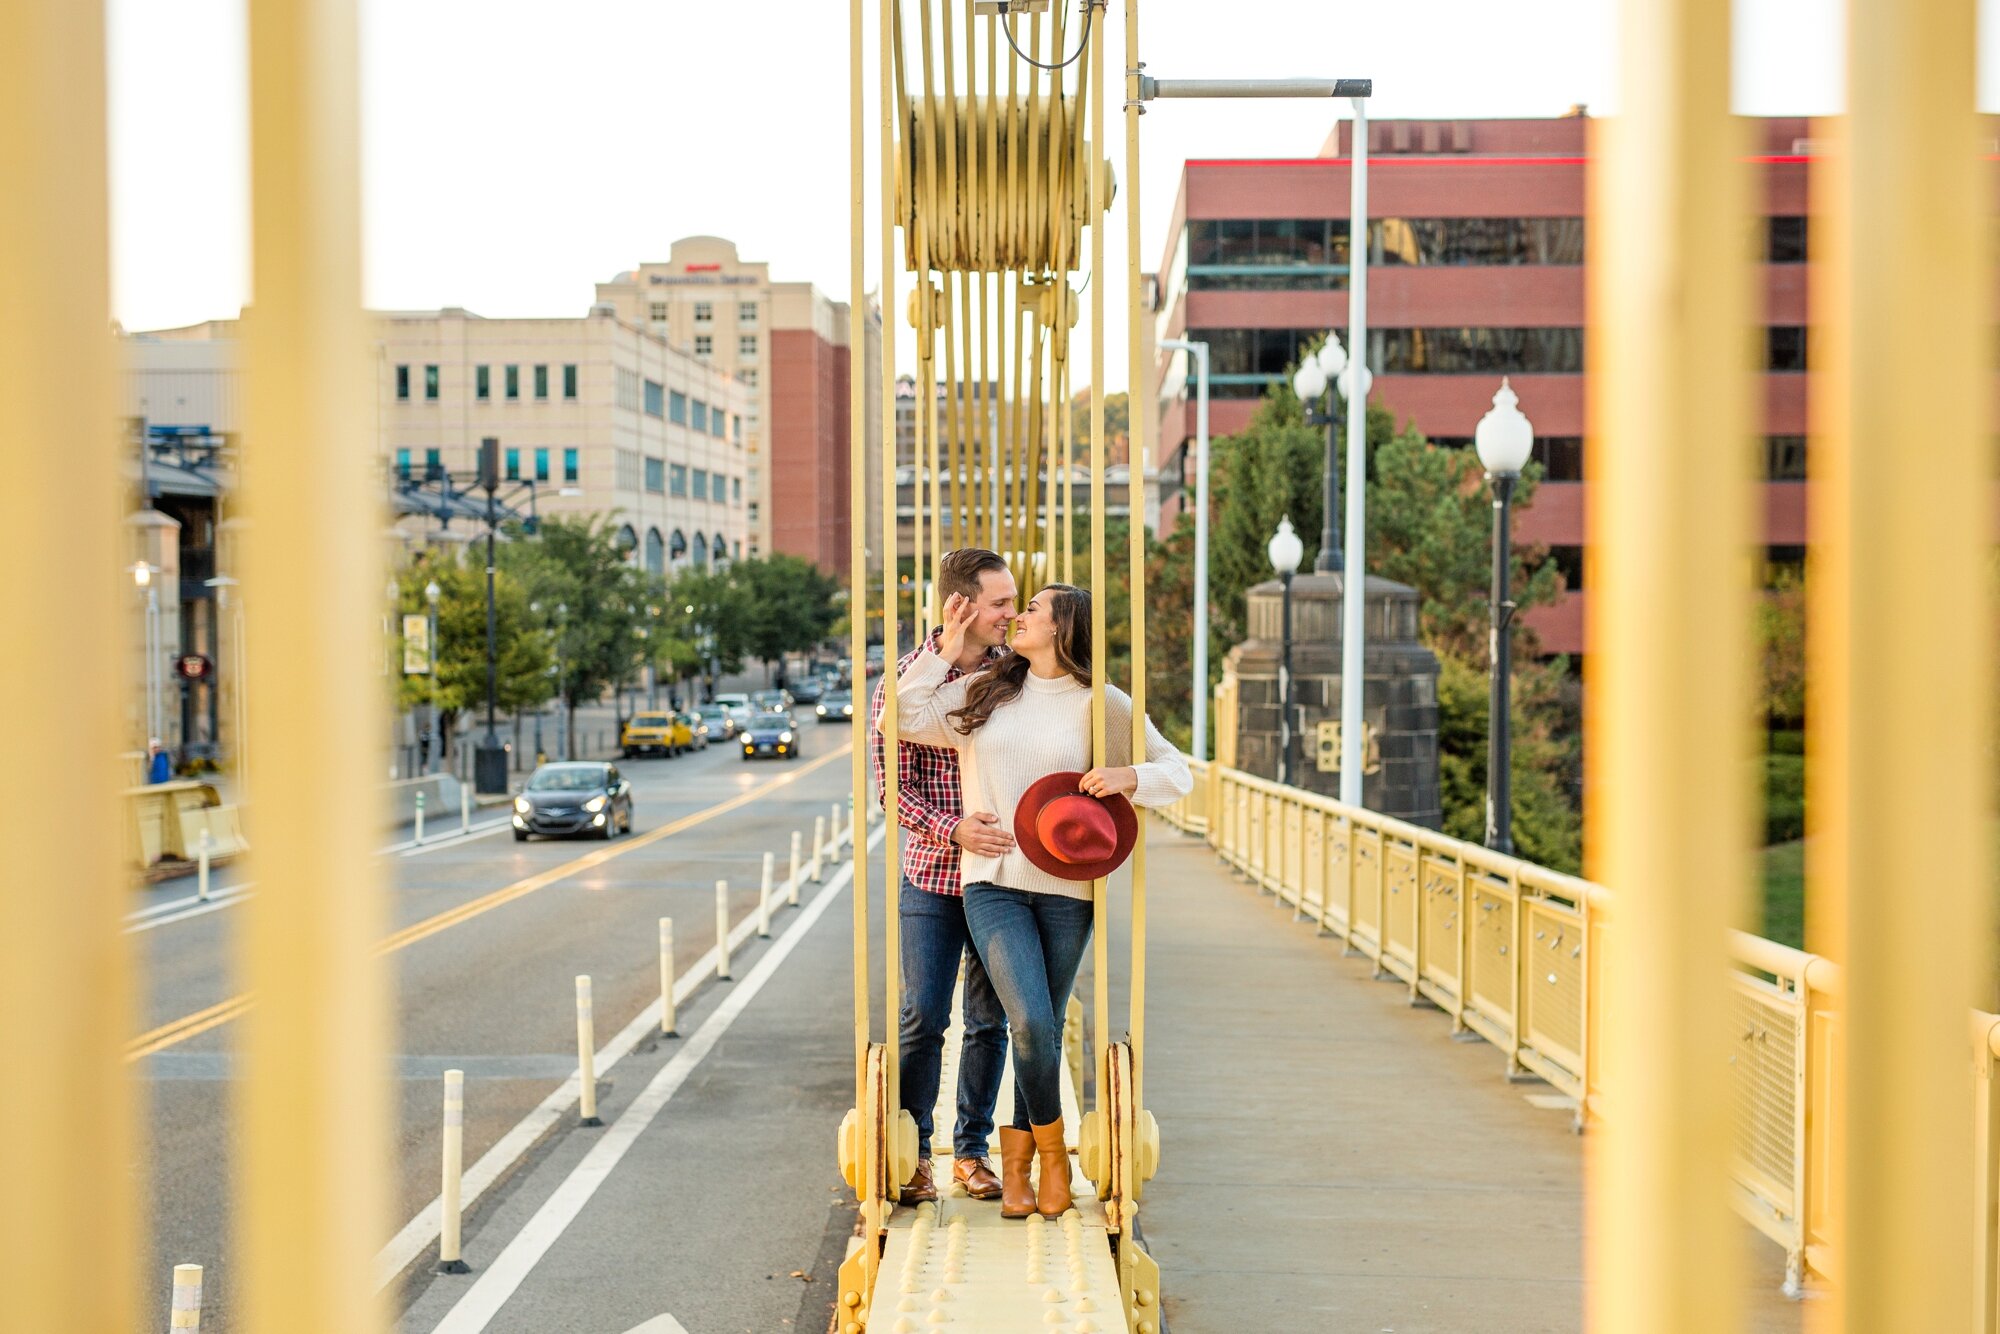 pittsburgh wedding photographer, allegheny commons park engagement photos, north shore engagement photos, roberto clemente bridge engagement photos, mexican war streets